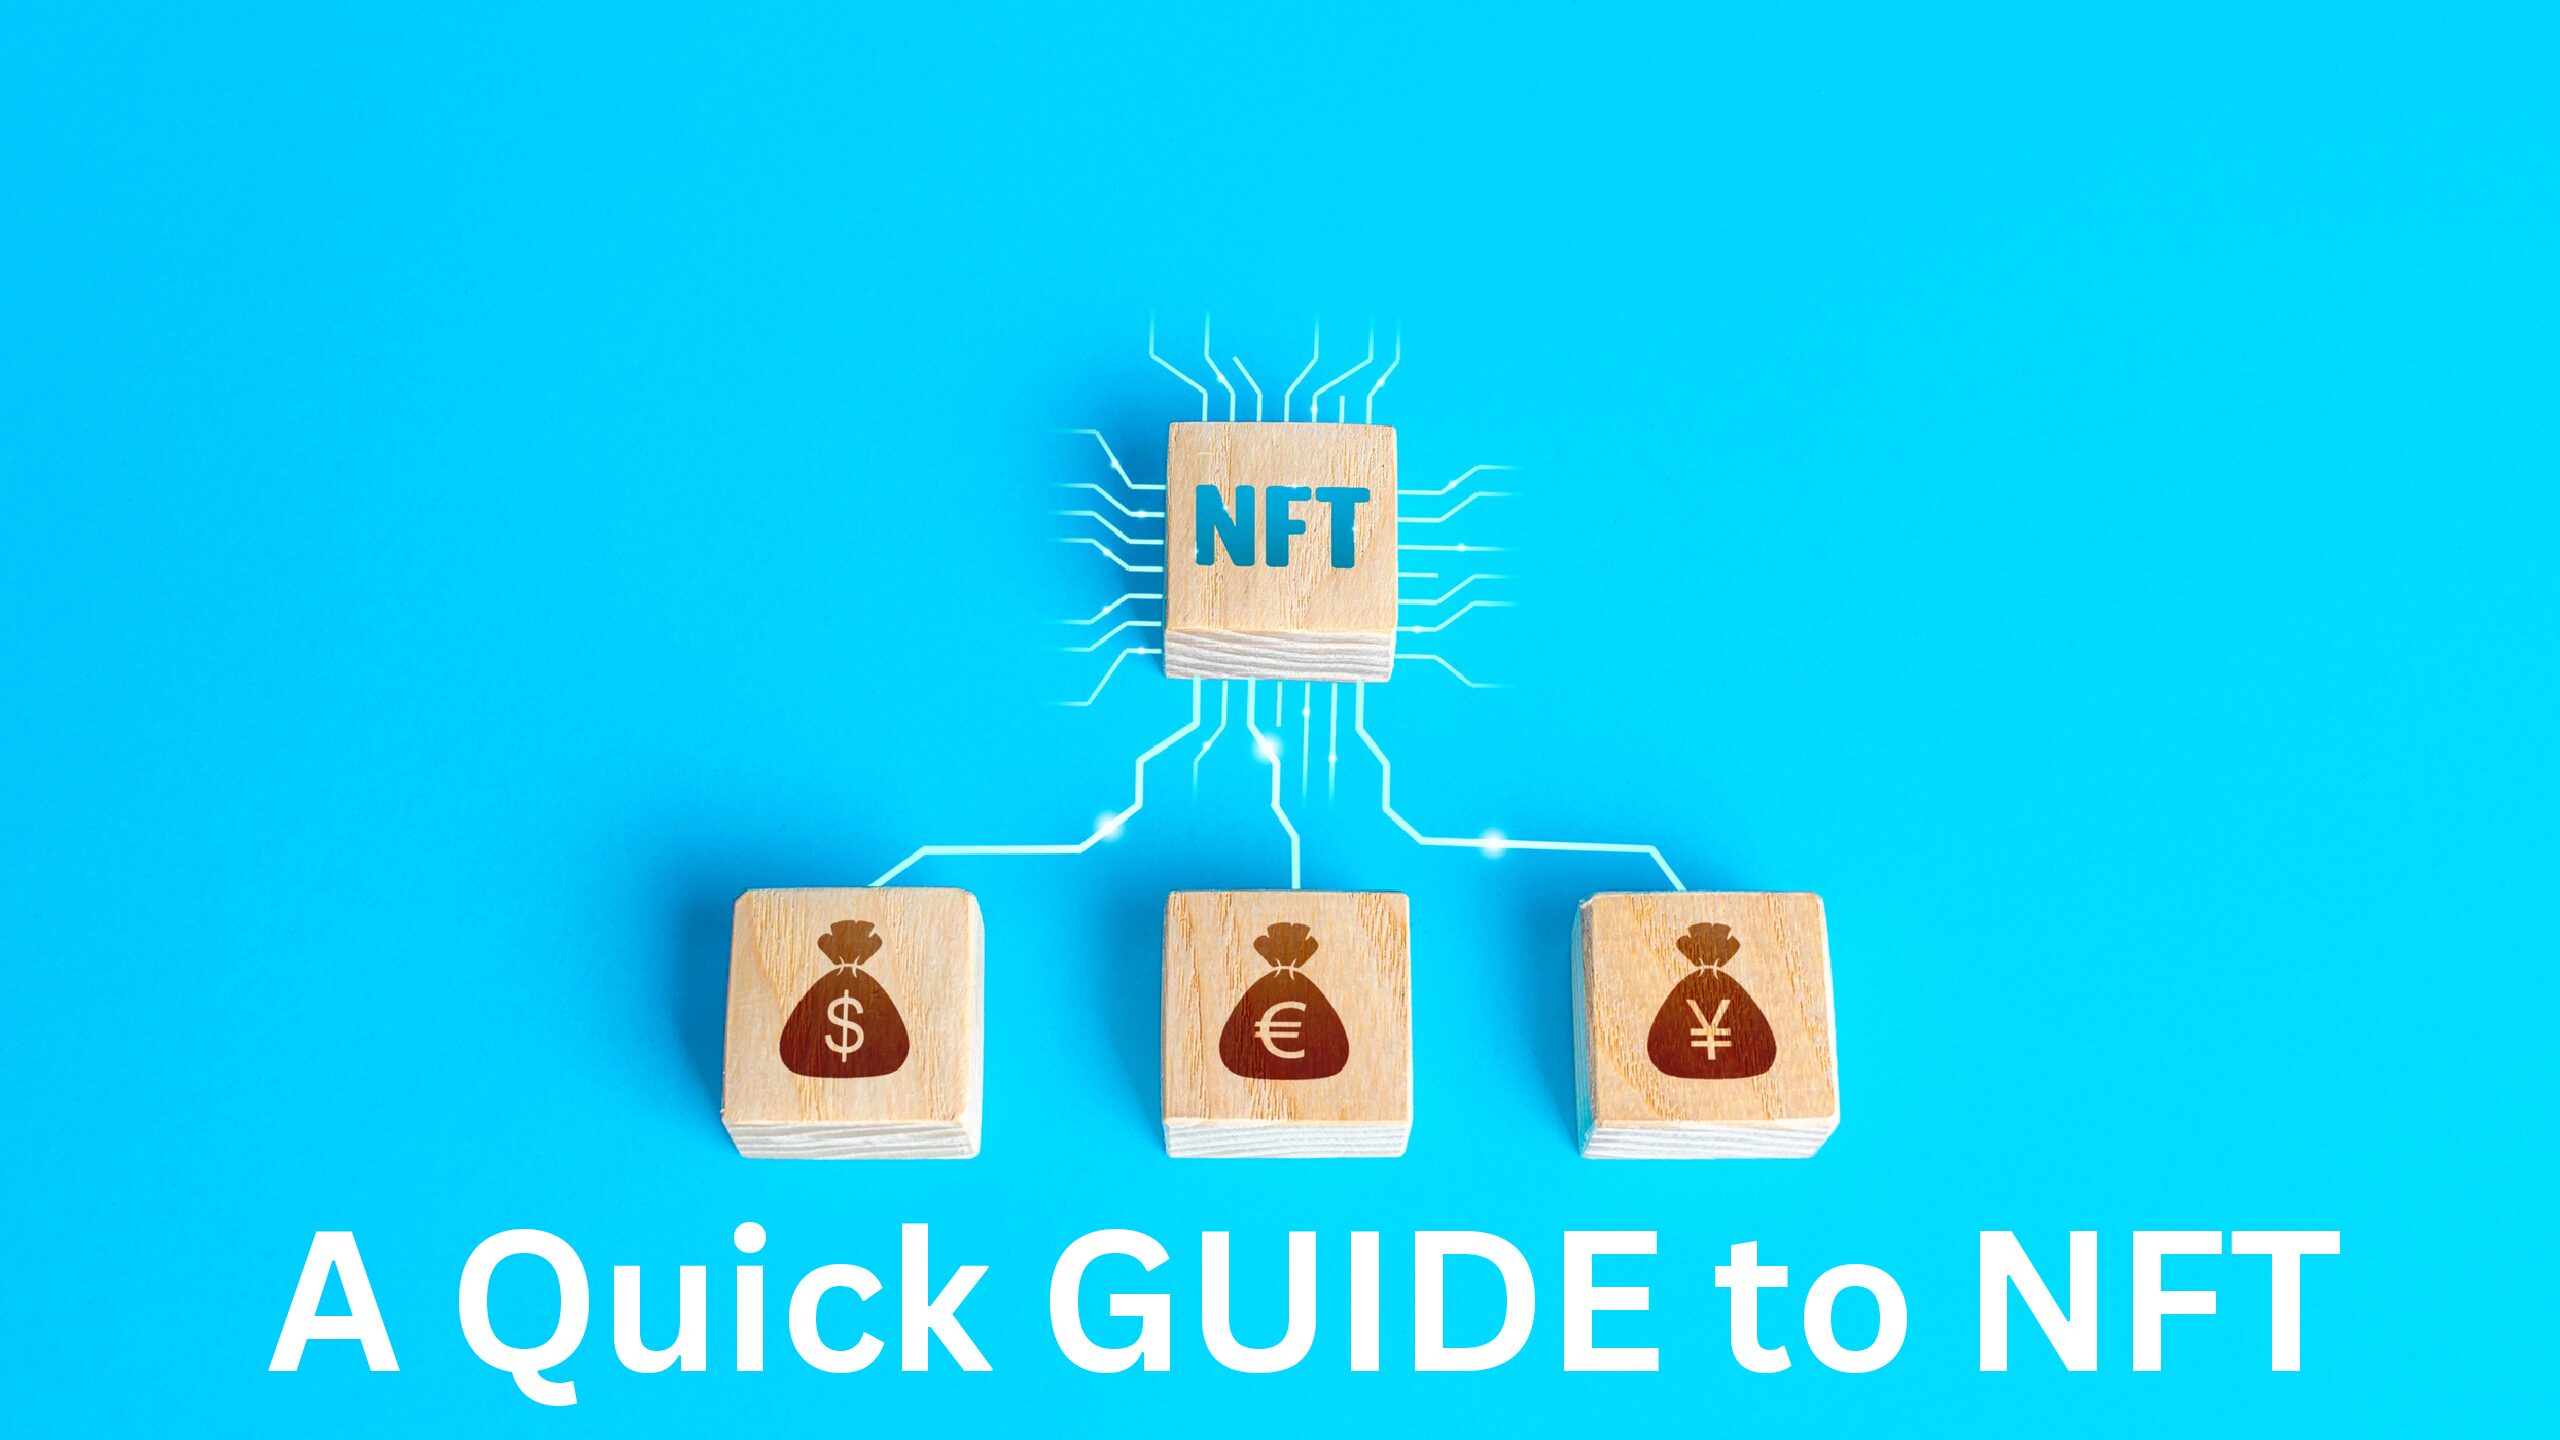 A Quick Guide To NFT